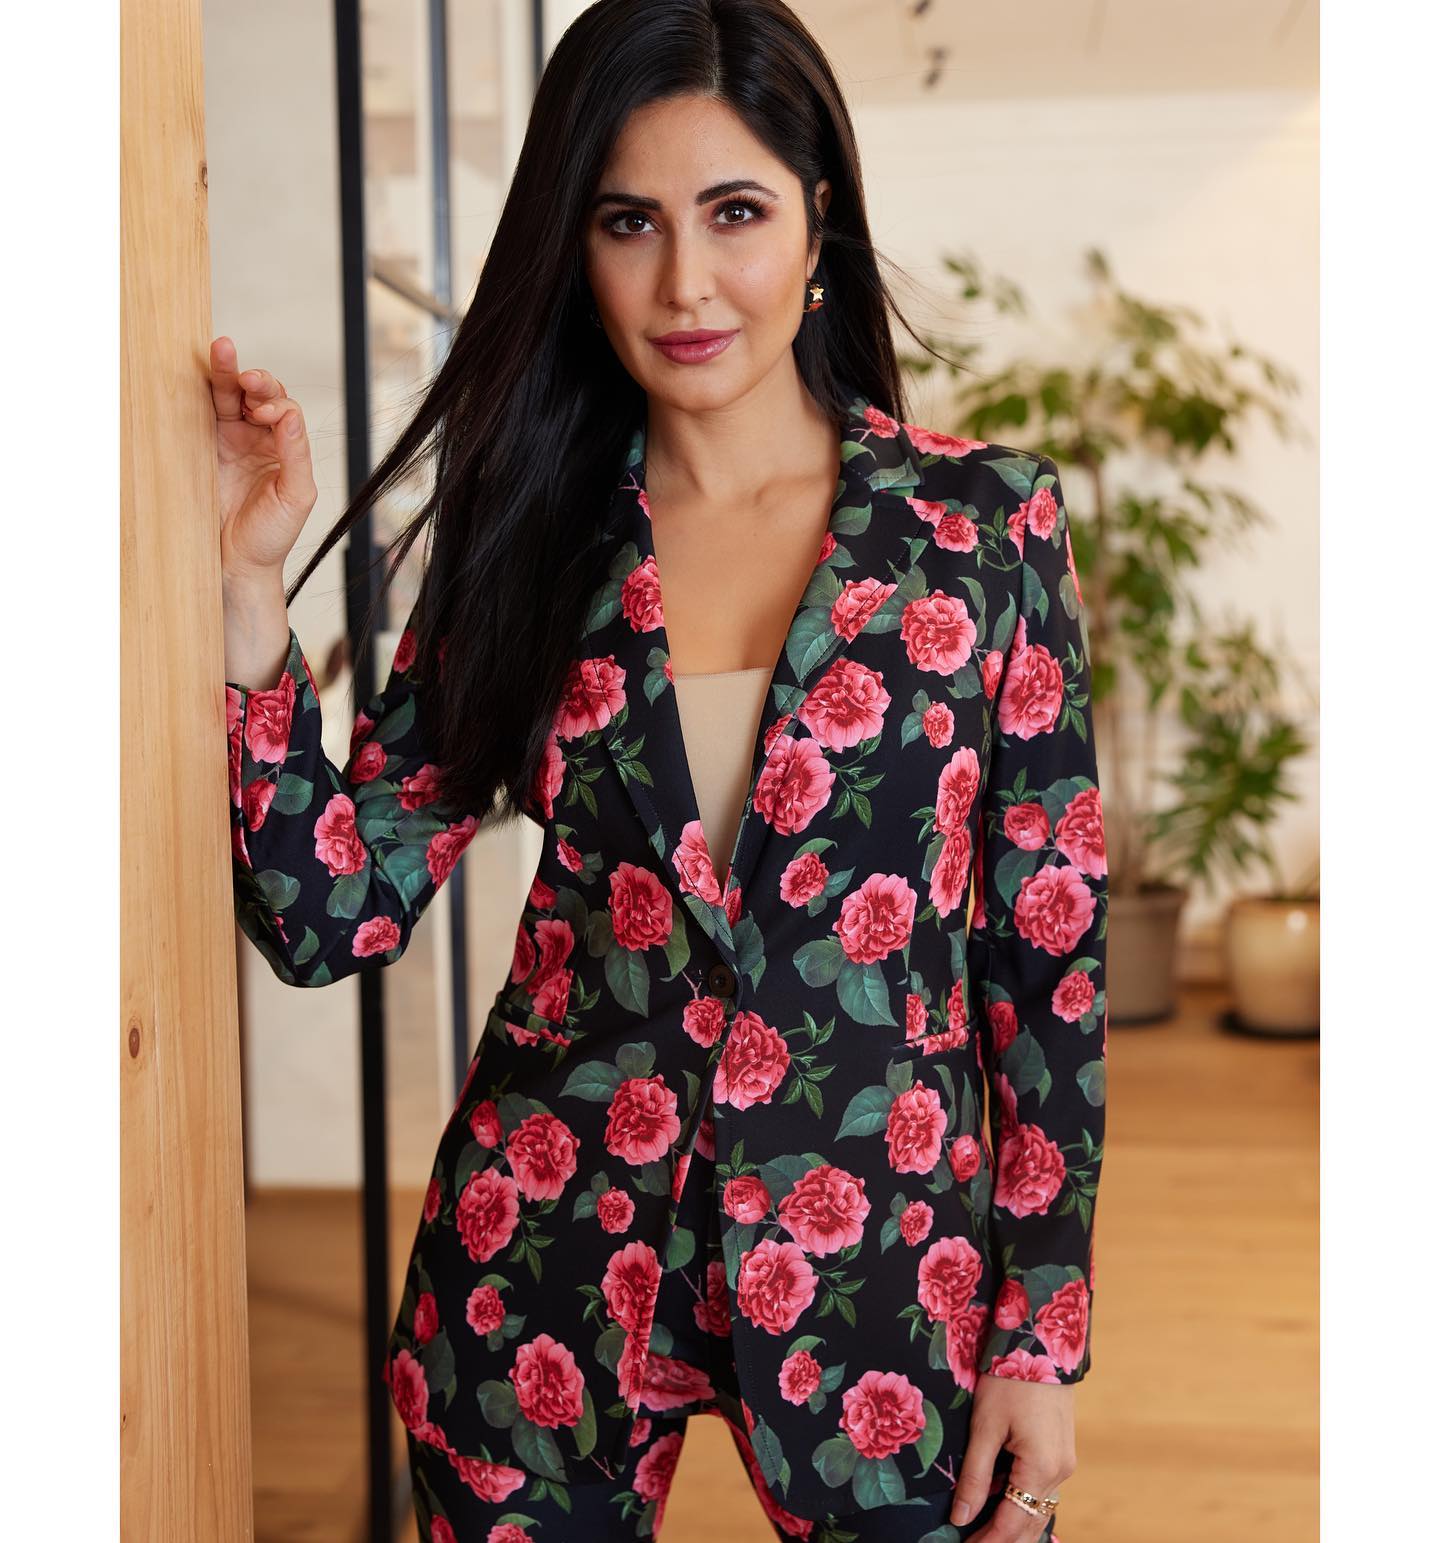 Katrina Kaif's Red Outfits On And Off The Screen